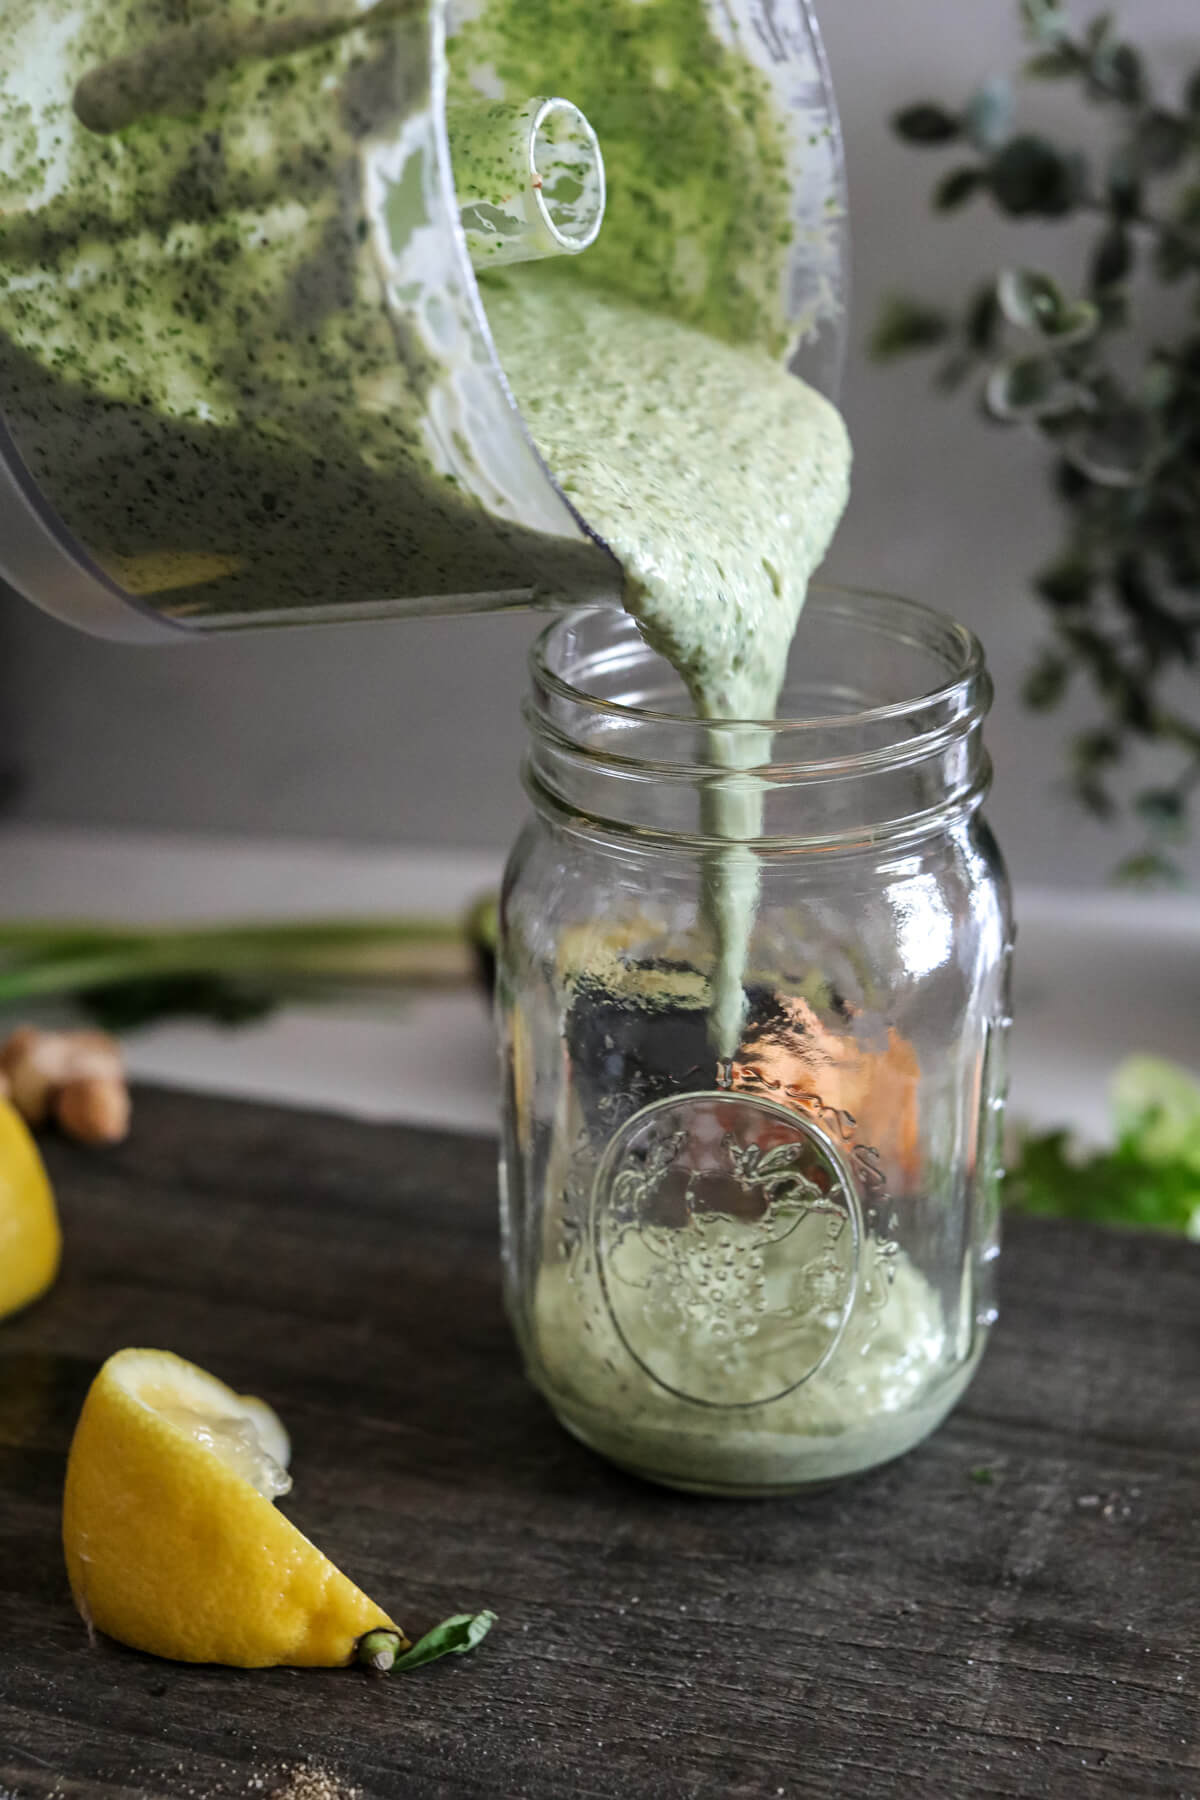 Freshly made Green Goddess Dressing being poured into a glass jar.